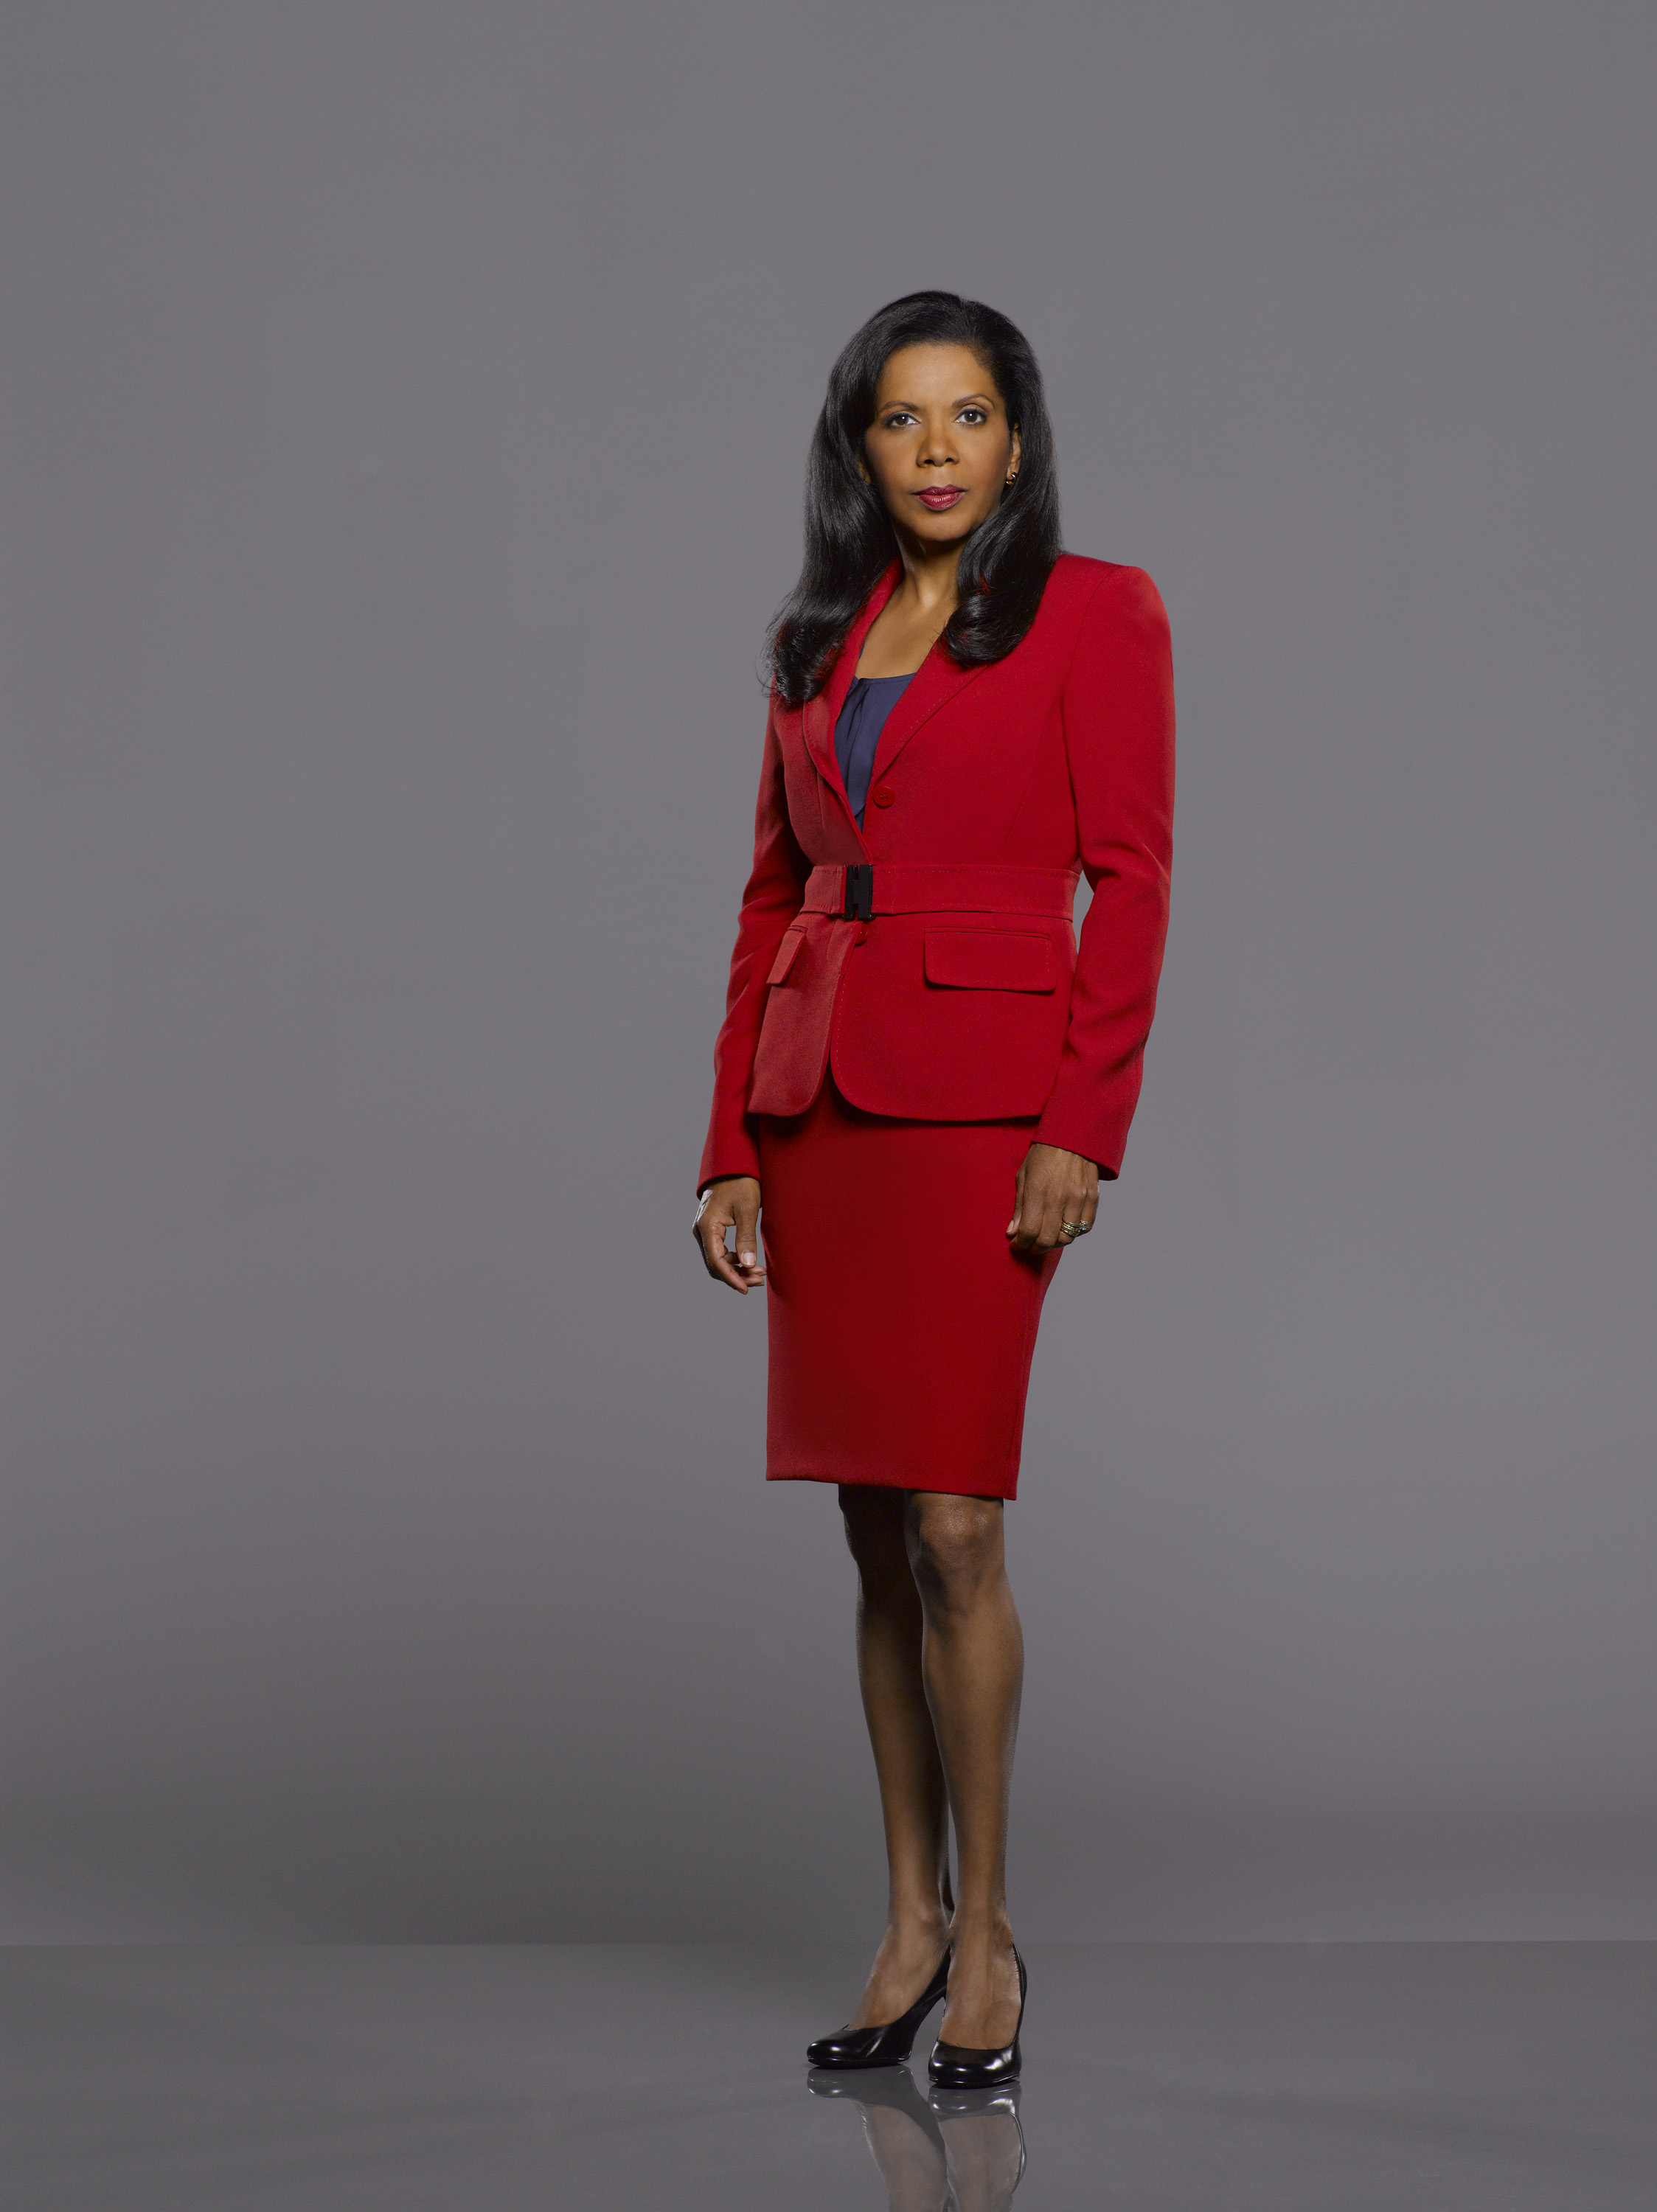 penny johnson jerald quotes. 